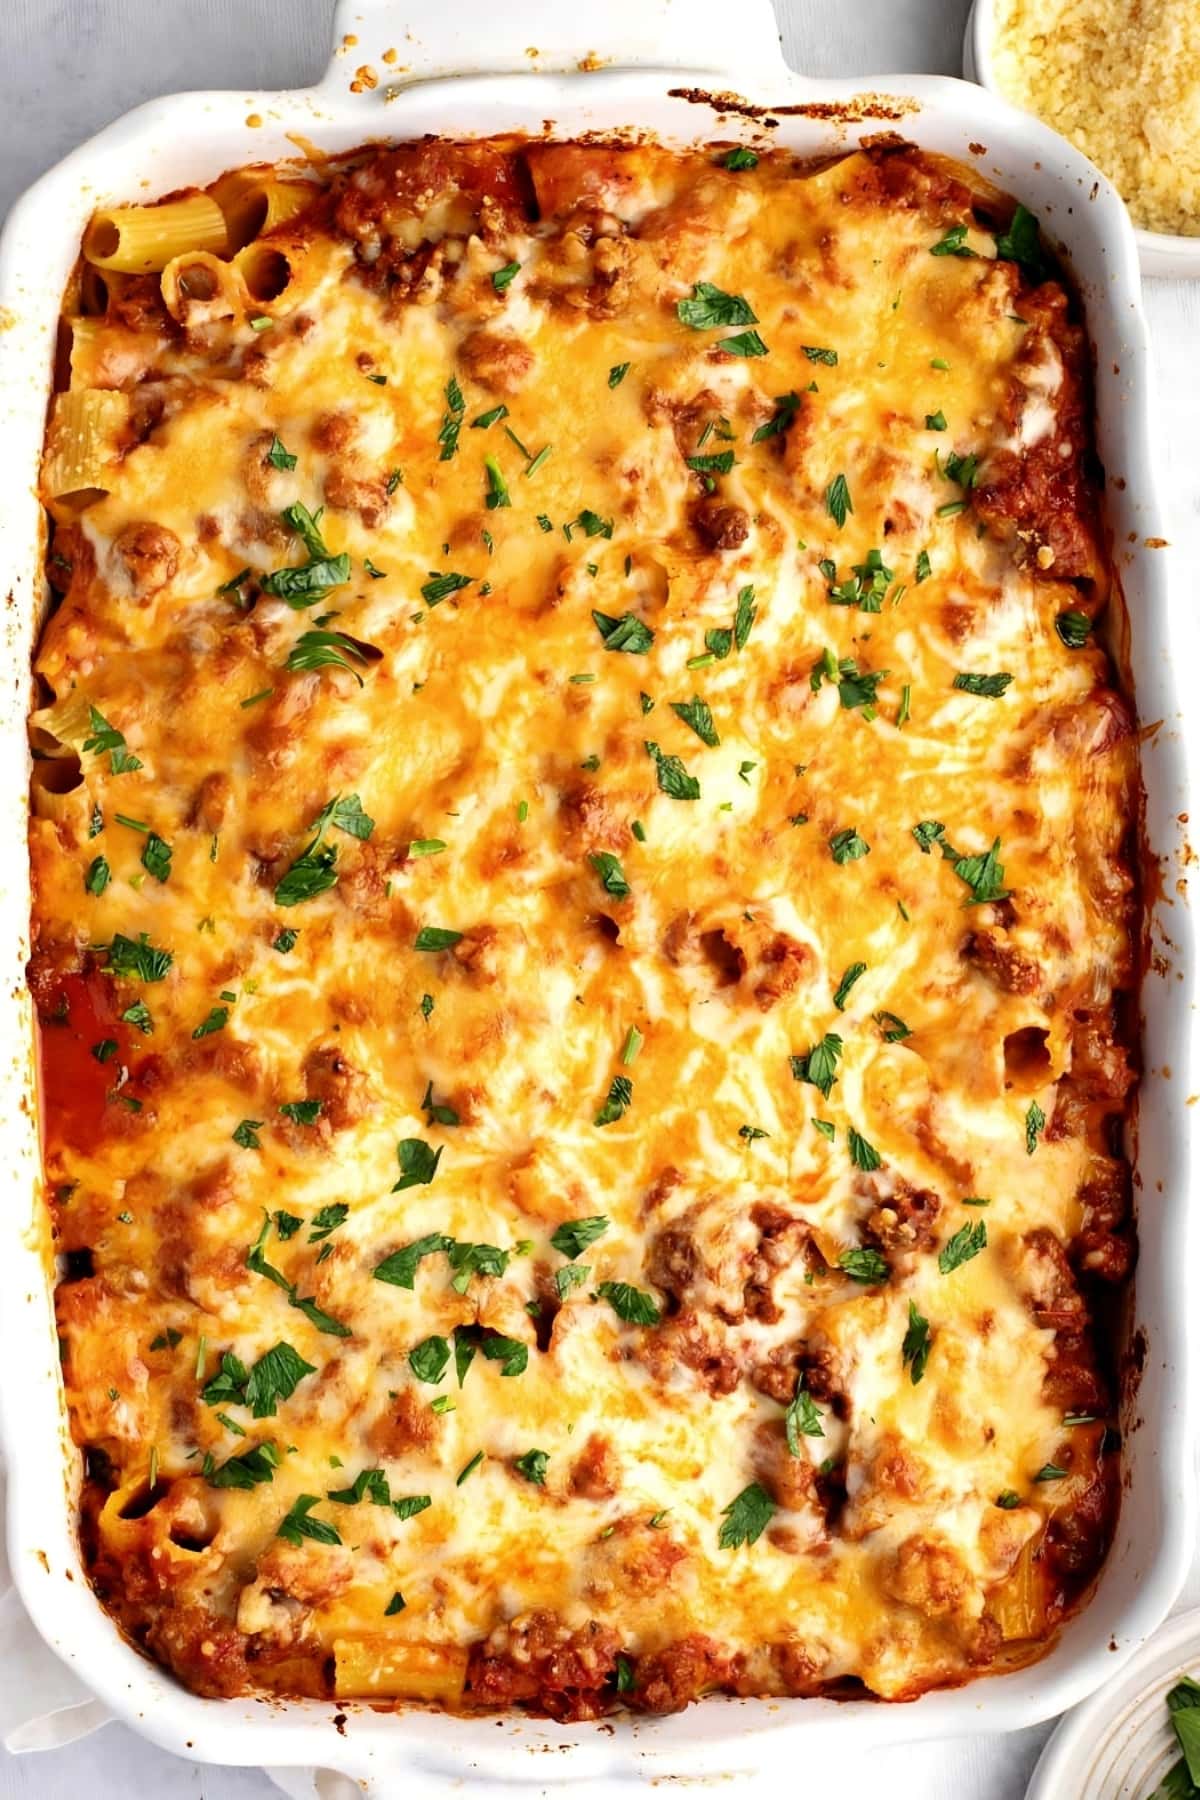 Homemade Cheesy and Meaty Baked Rigatoni on a White Casserole